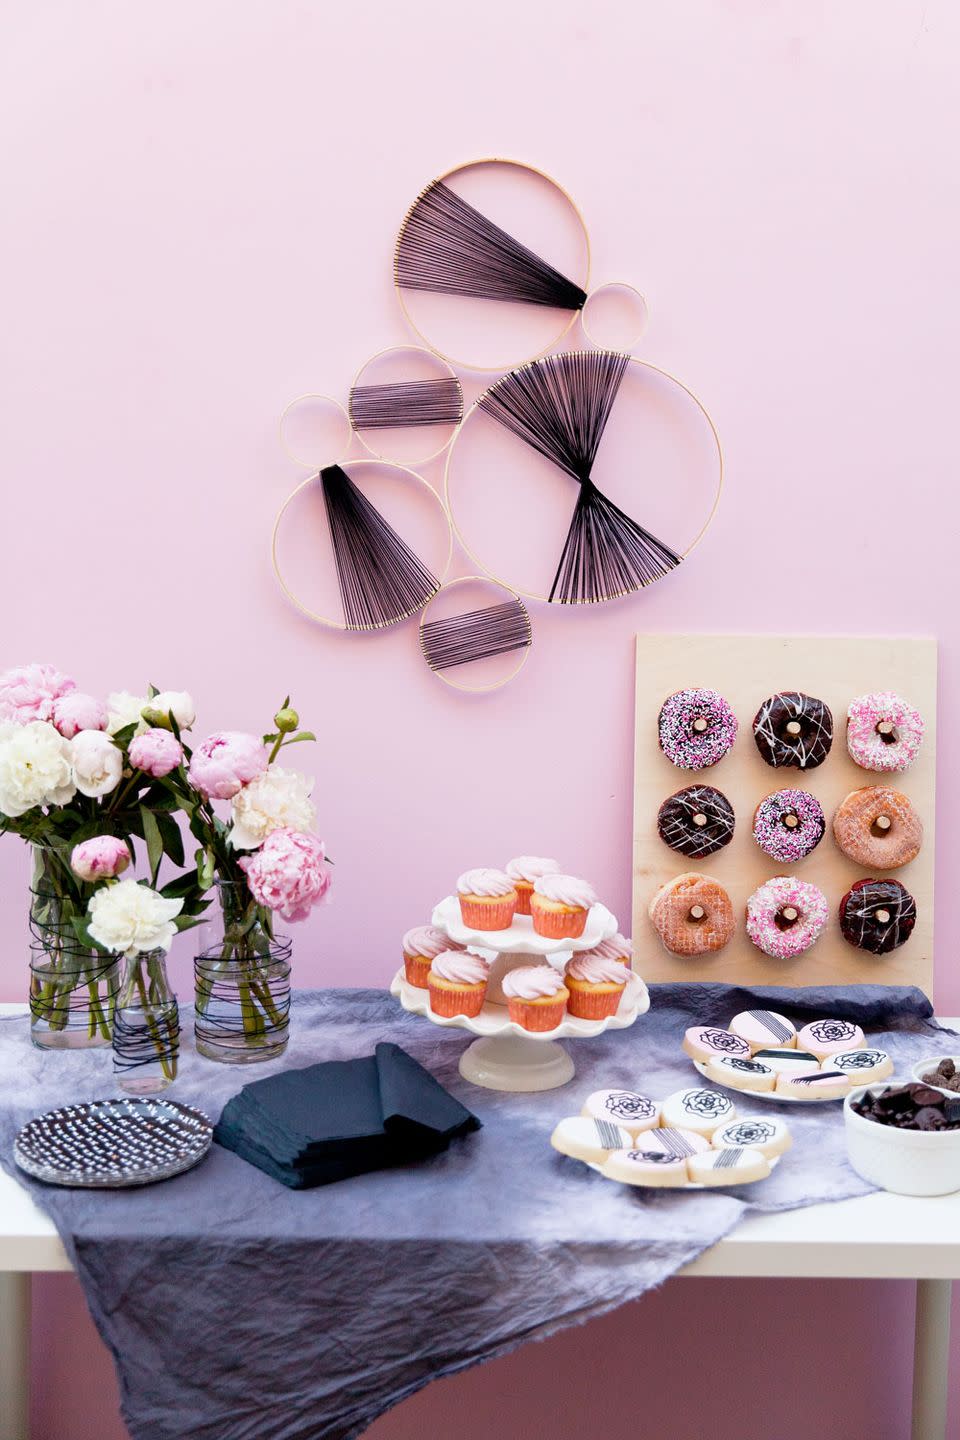 thie black and pink themed shower, a great idea for a baby shower, features embroidery hoops, cupcakes, and donuts